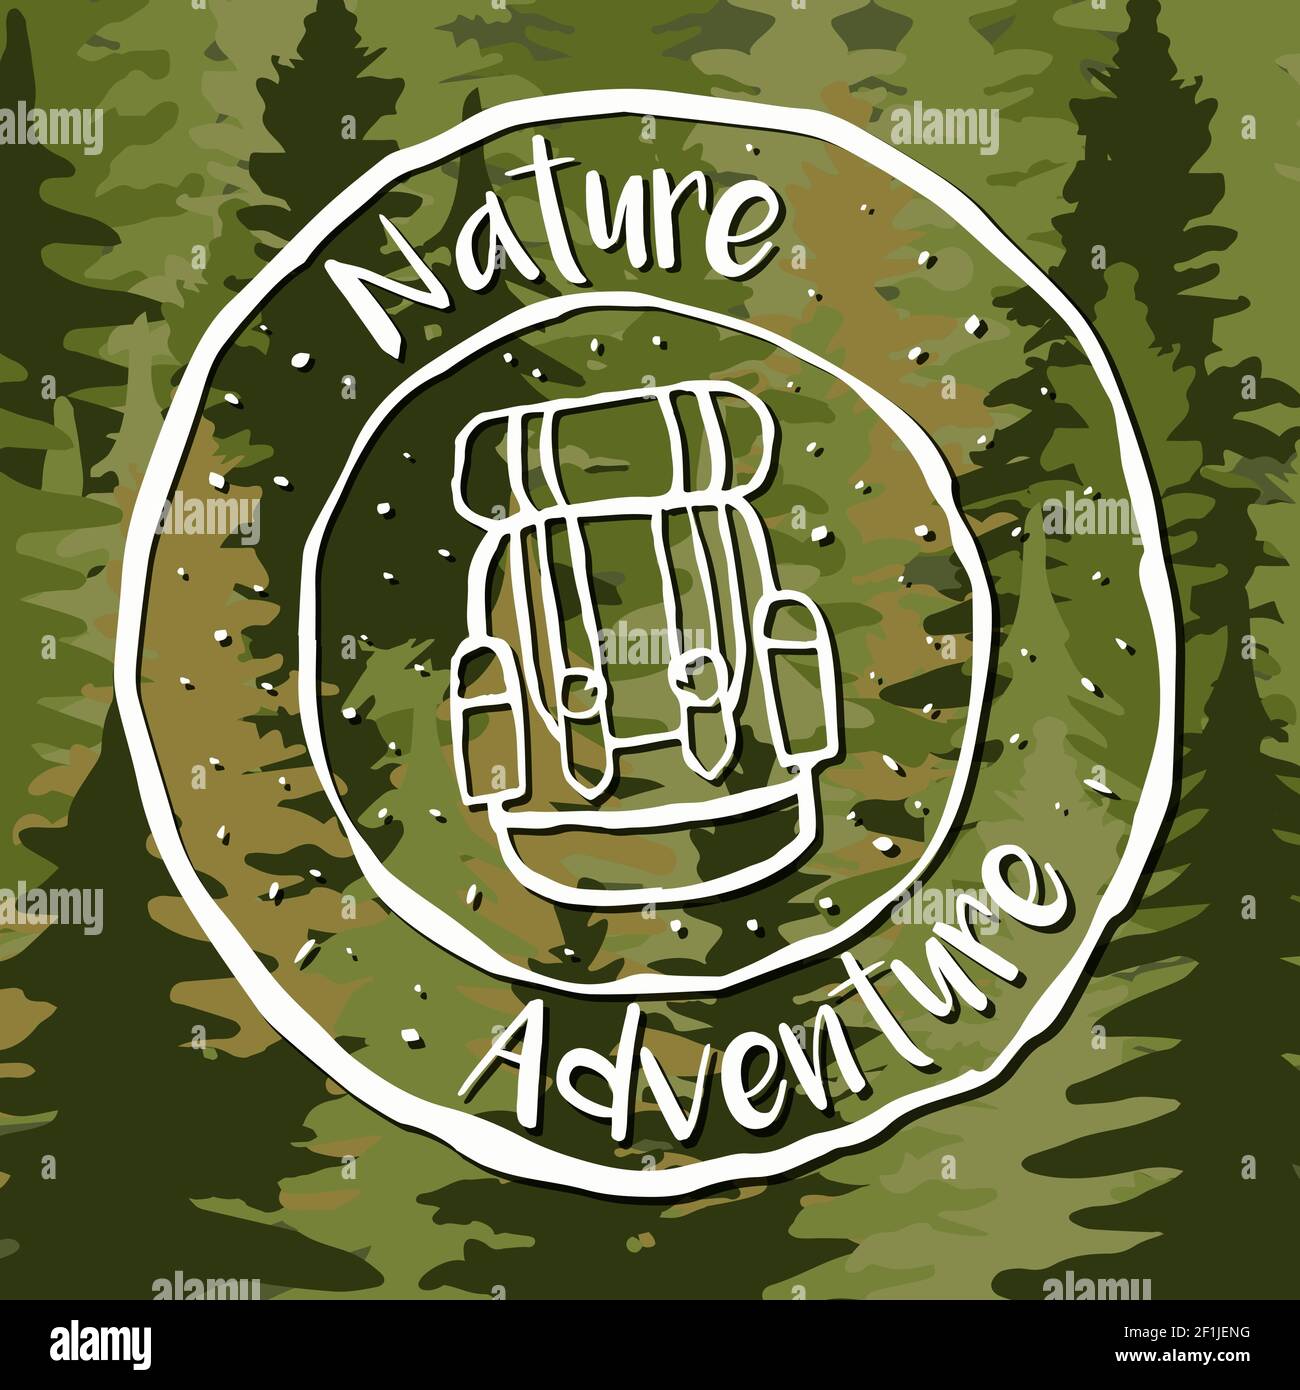 Nature adventure label with hand drawn backpack design and pine tree forest background. Eco tourism vacation concept. Stock Vector